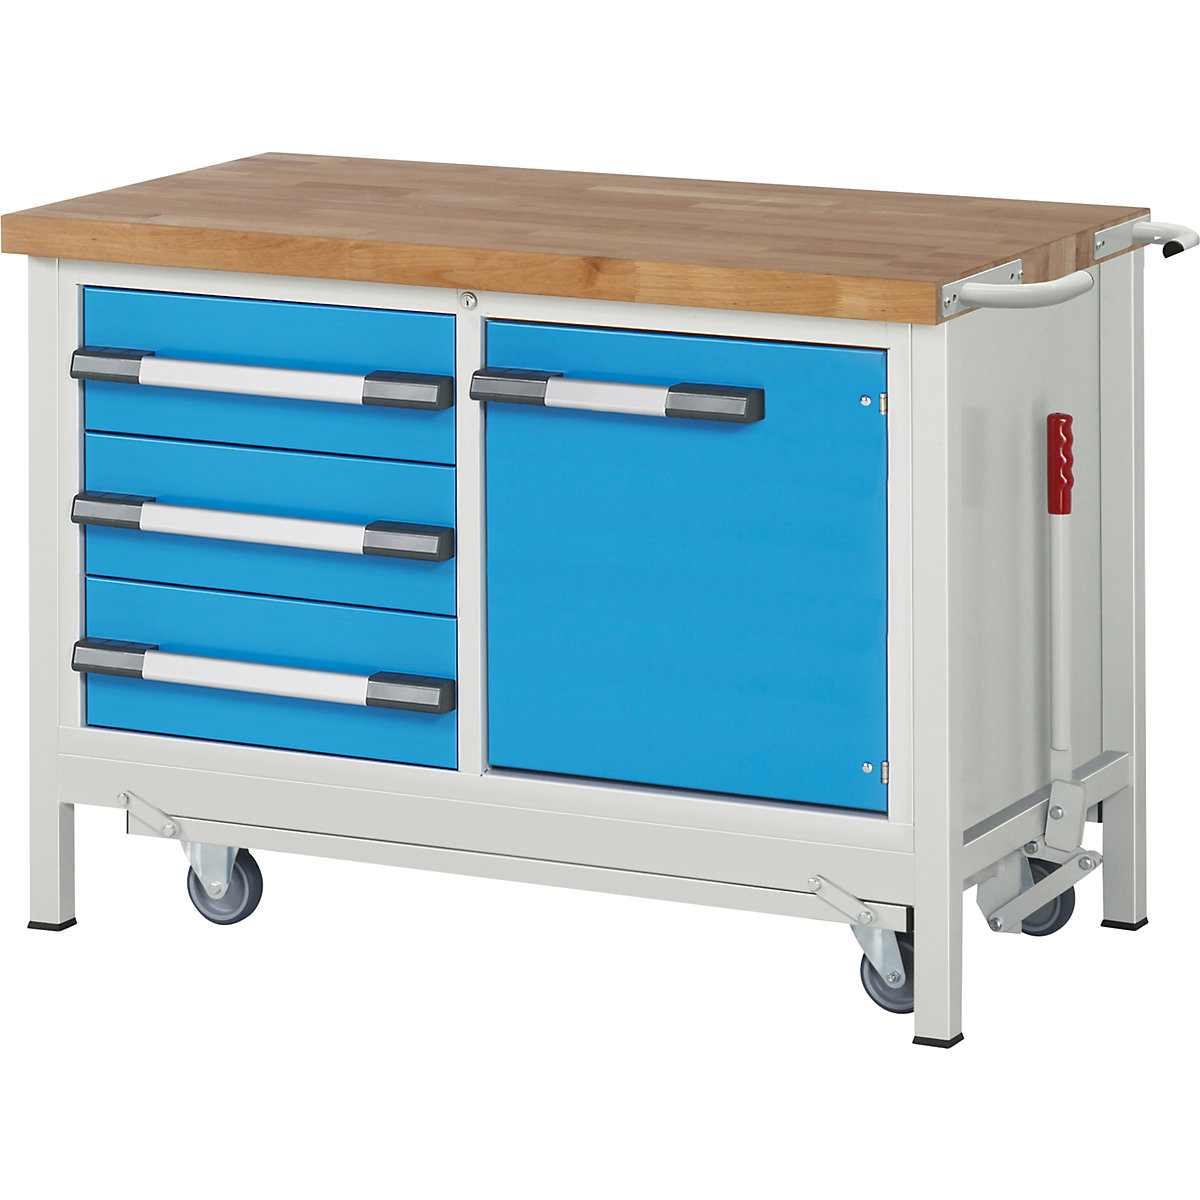 Mobile and lowerable workbench, Series 8000 frame construction - eurokraft pro